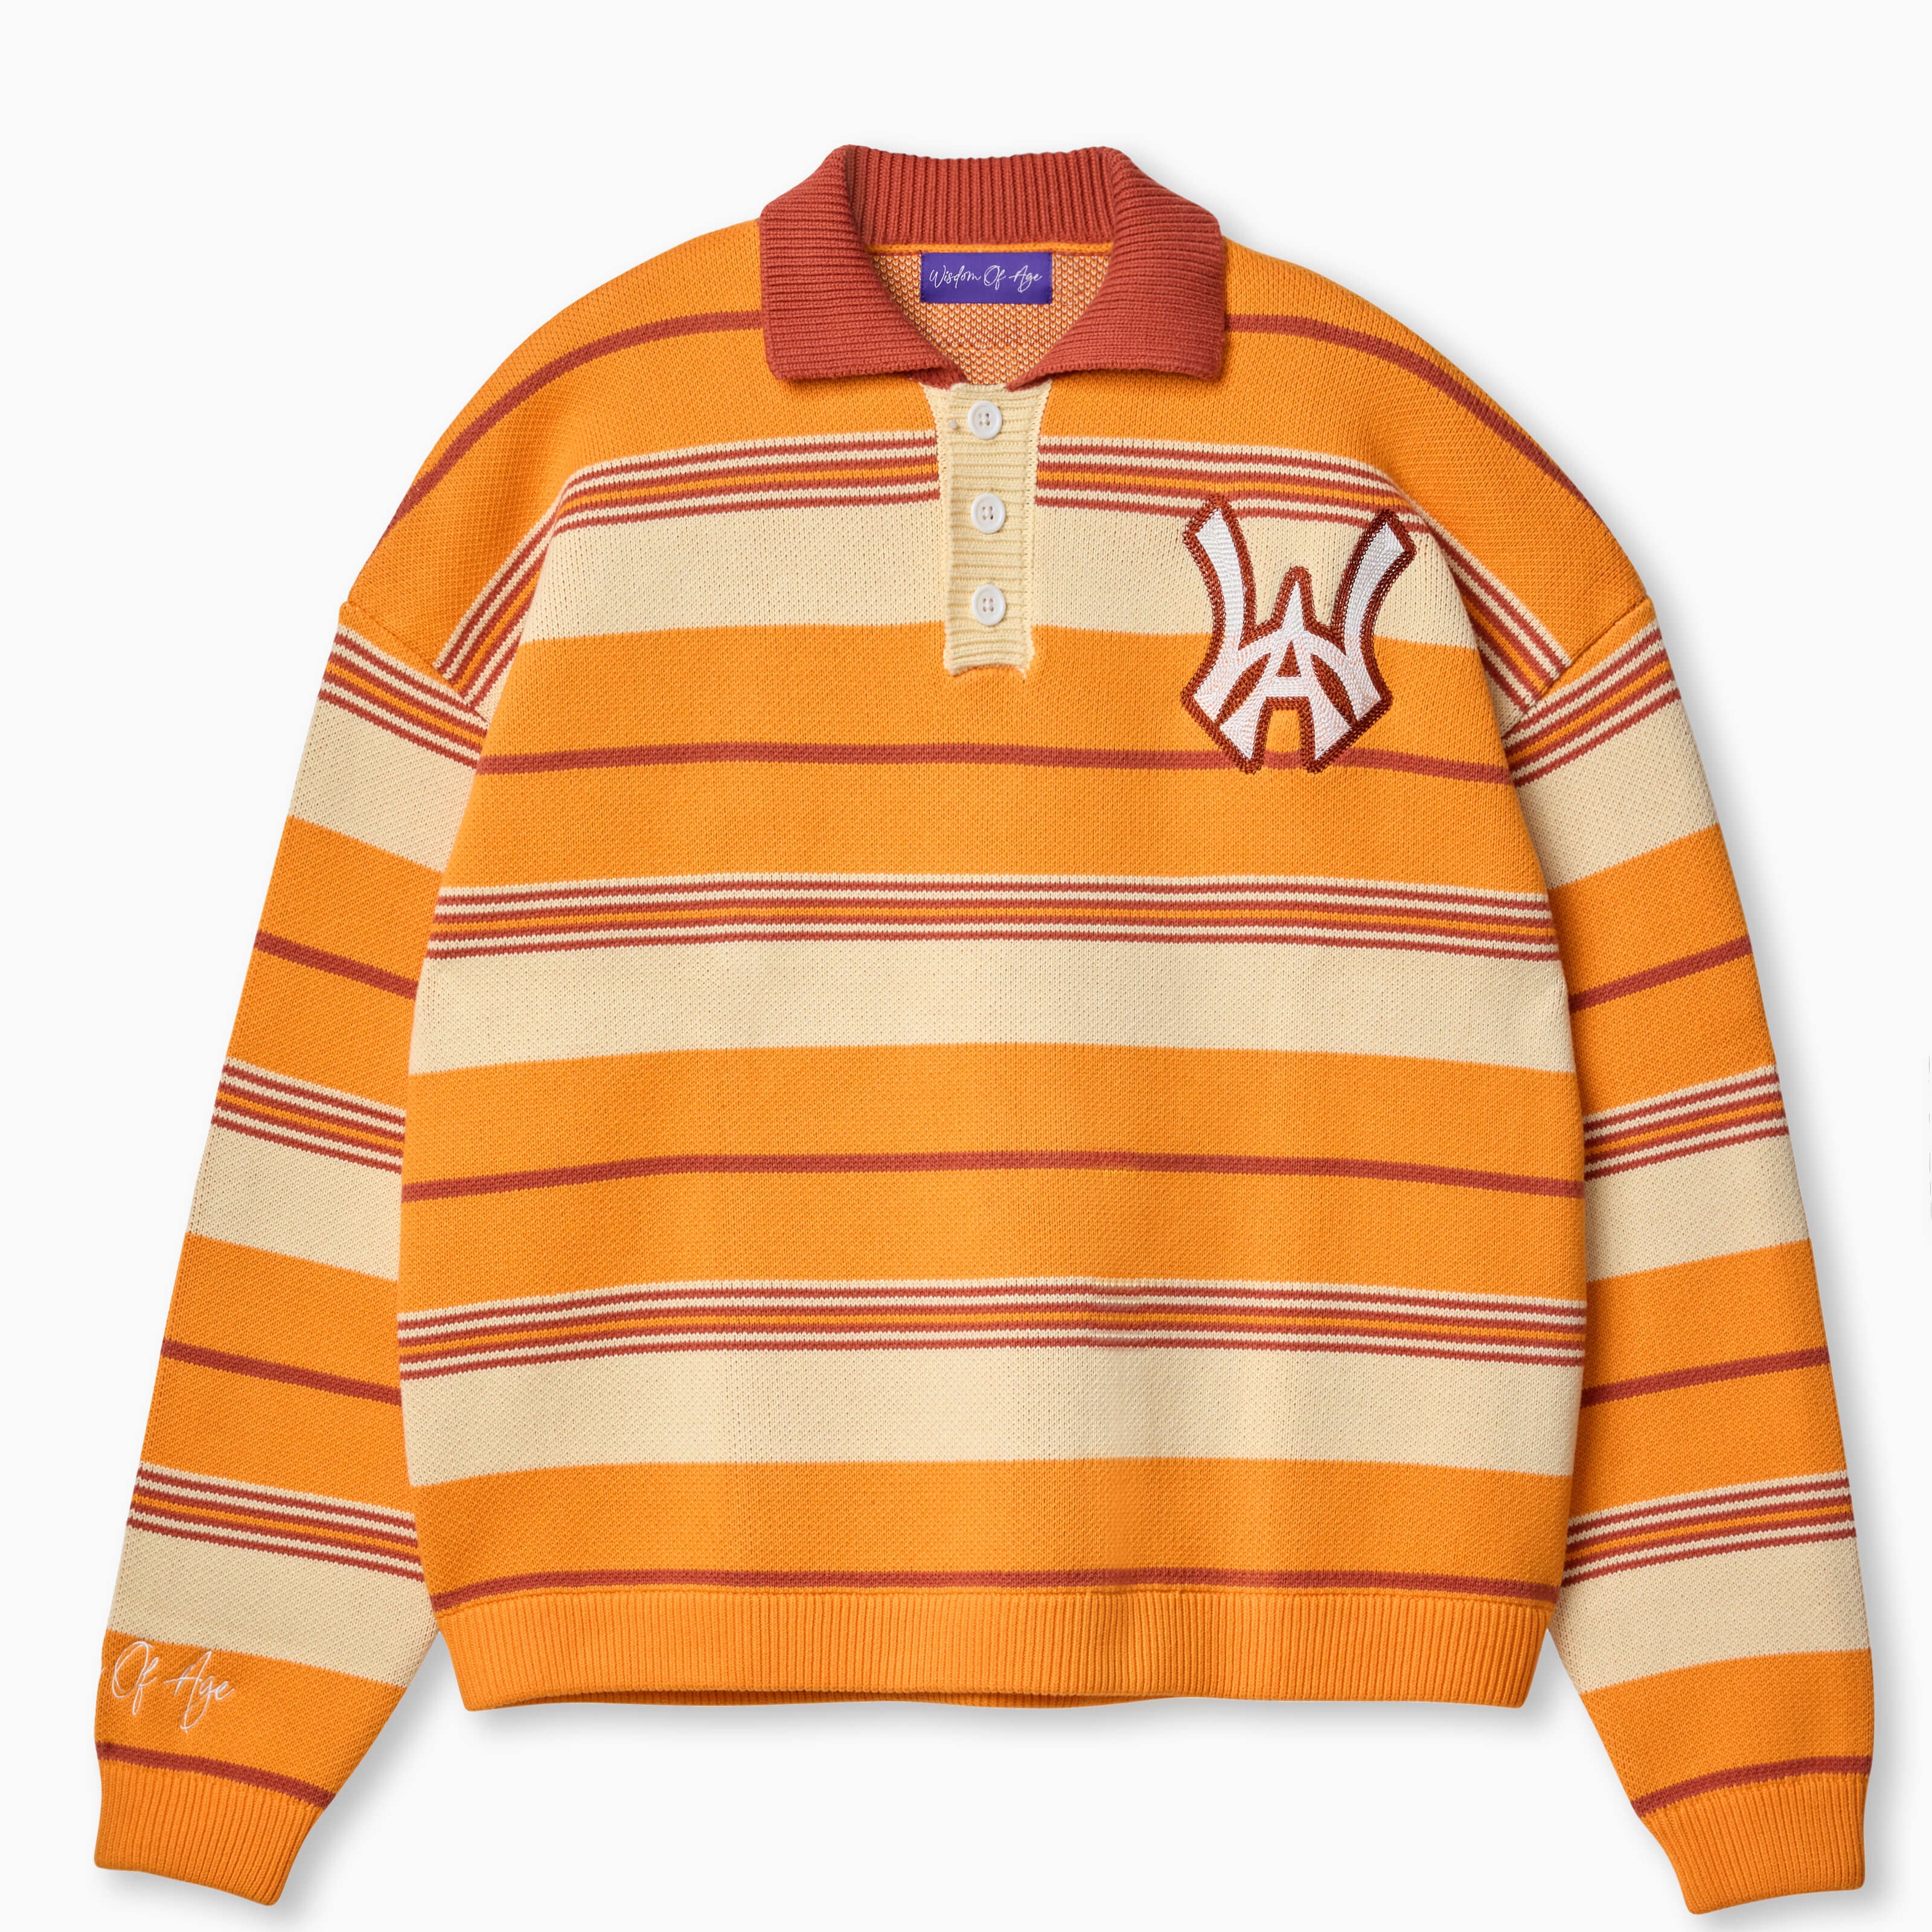 Wisdom of Age Orange Striped Carlton Rugby Sweater, Garfield color blend of orangy-tangerine and orange zest, with the WOA symbol on the top left side of the chest